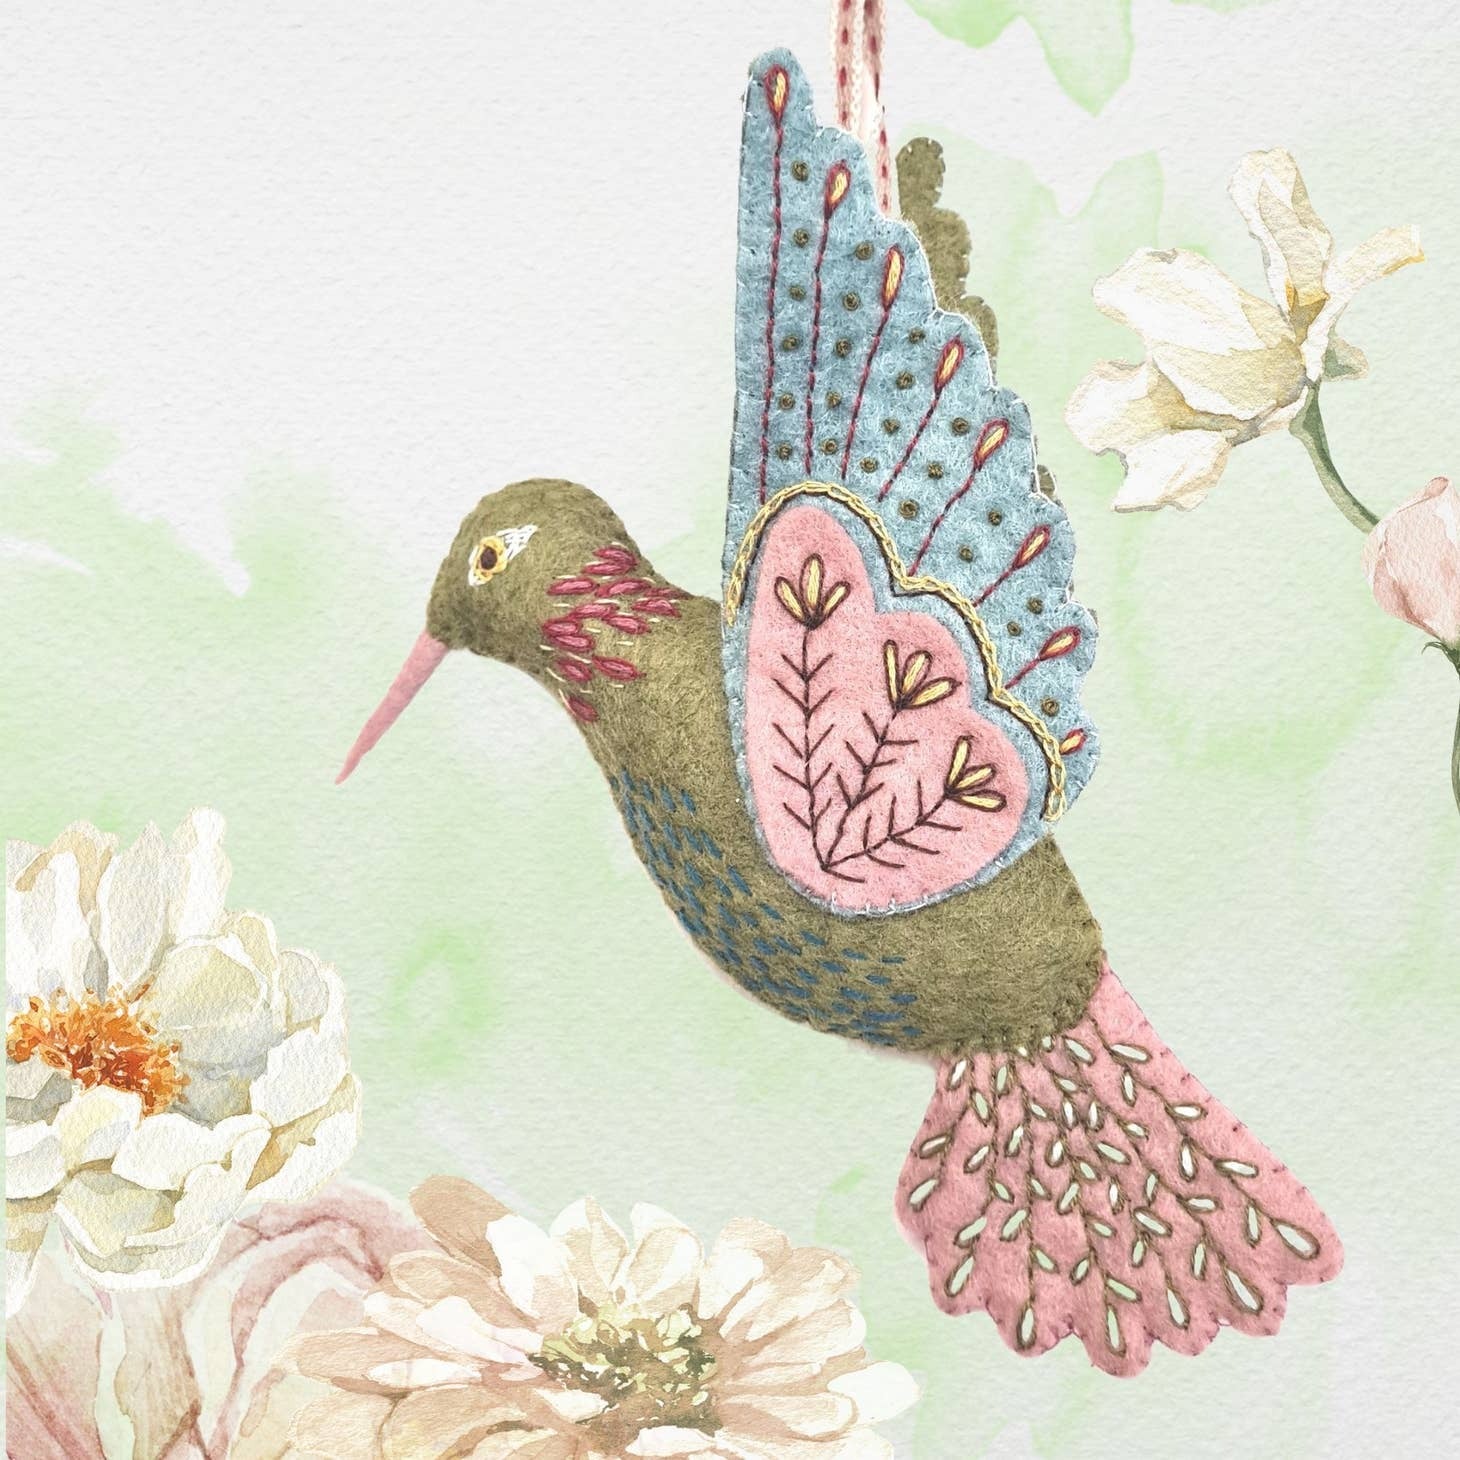 "Hand-painted watercolor illustration of the 'Hummingbird Felt Craft Mini Kit' by Corinne Lapierre, showcasing a detailed hummingbird with vibrant blue wings and pink heart-shaped patterns, nestled among delicate white blossoms.